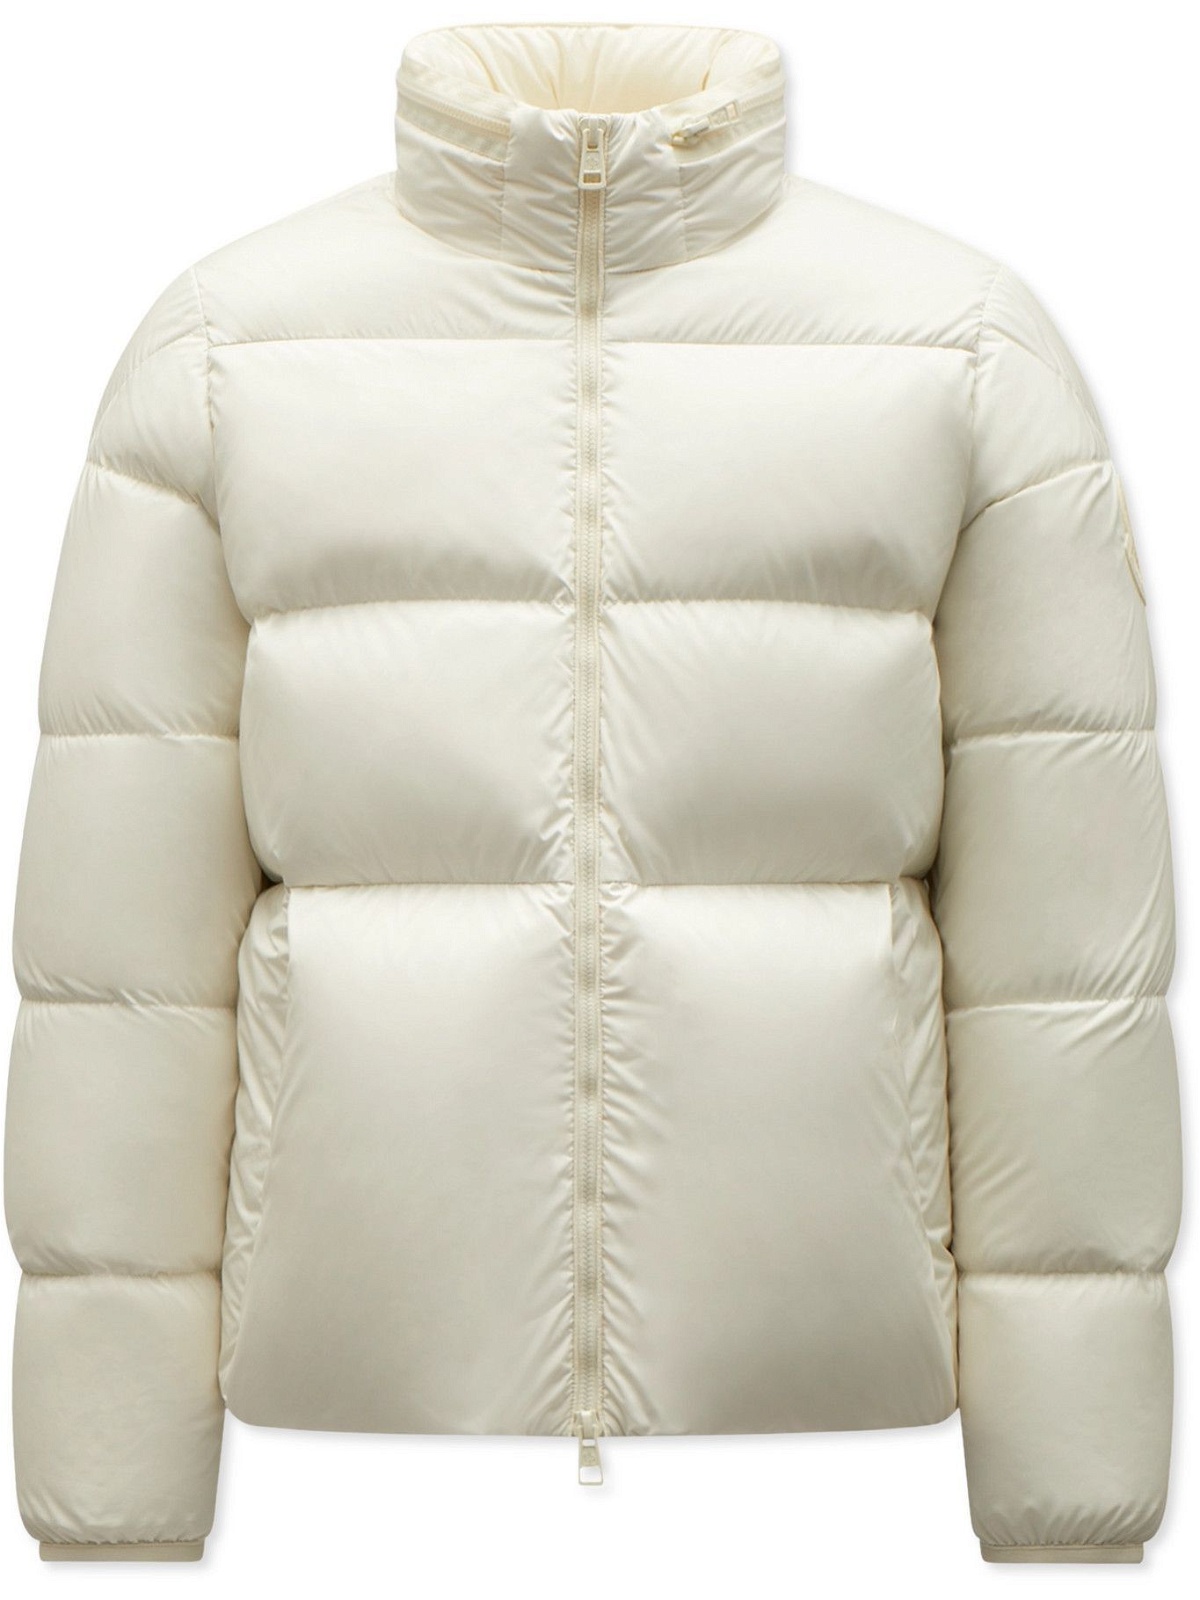 Moncler Genius - 2 Moncler 1952 Akishima Quilted Shell Down Jacket 